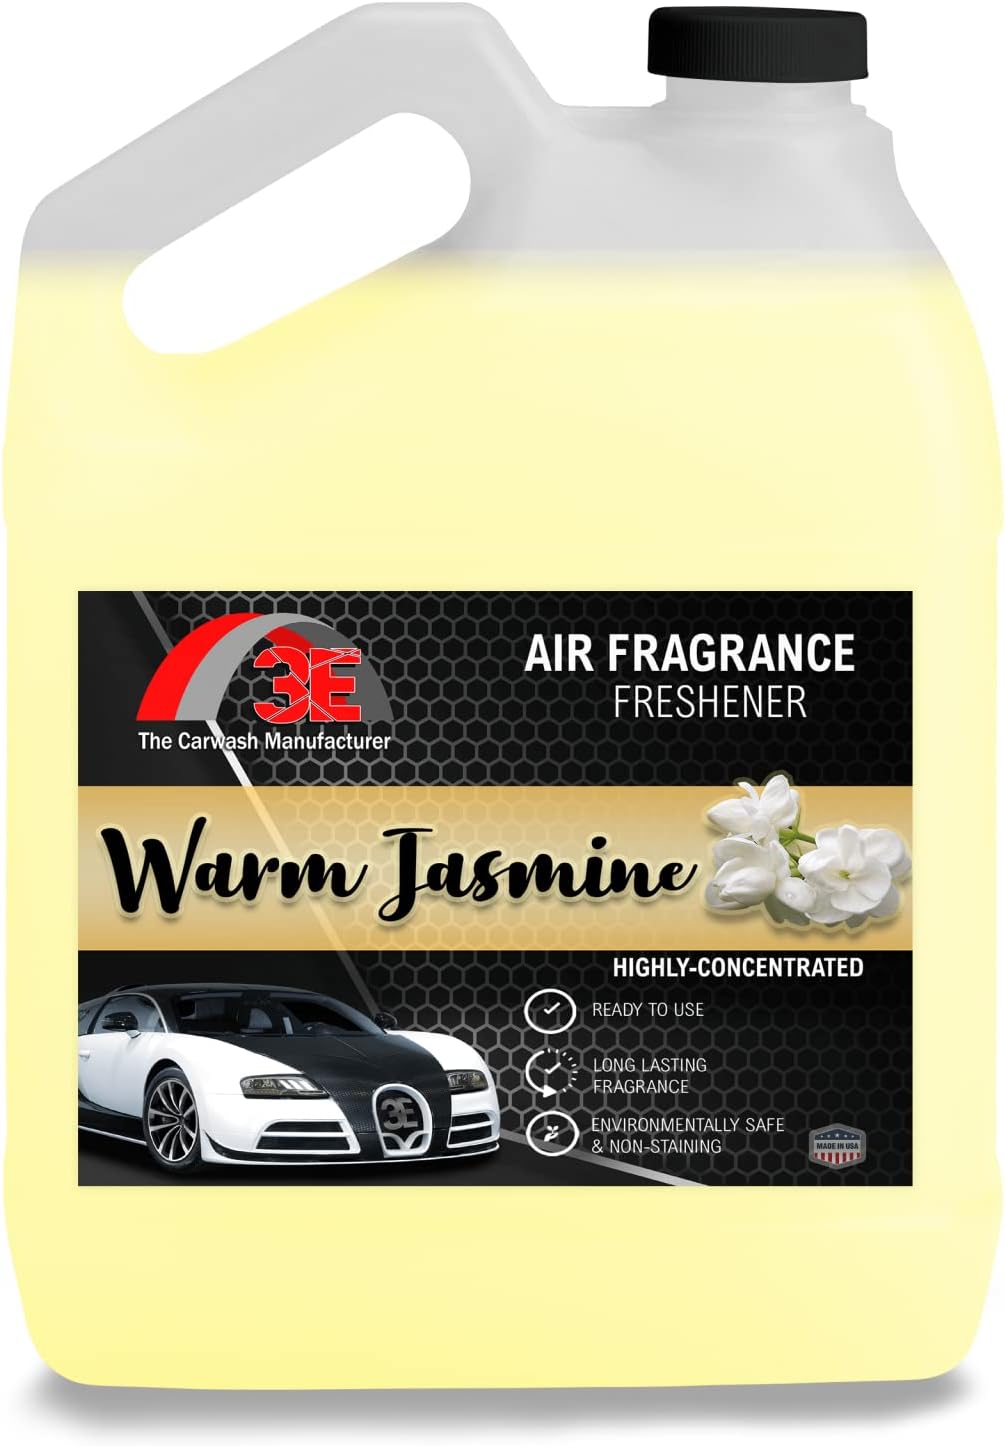 3E Smell Premium Air Freshener, Deodorizer and Odor Eliminator Ready-to-Use Liquid Air Freshener, All Natural | Great for Cars, Trucks, SUVs, RVs & More (128 oz) 1 Gallon, Made in the USA (Jasmine)